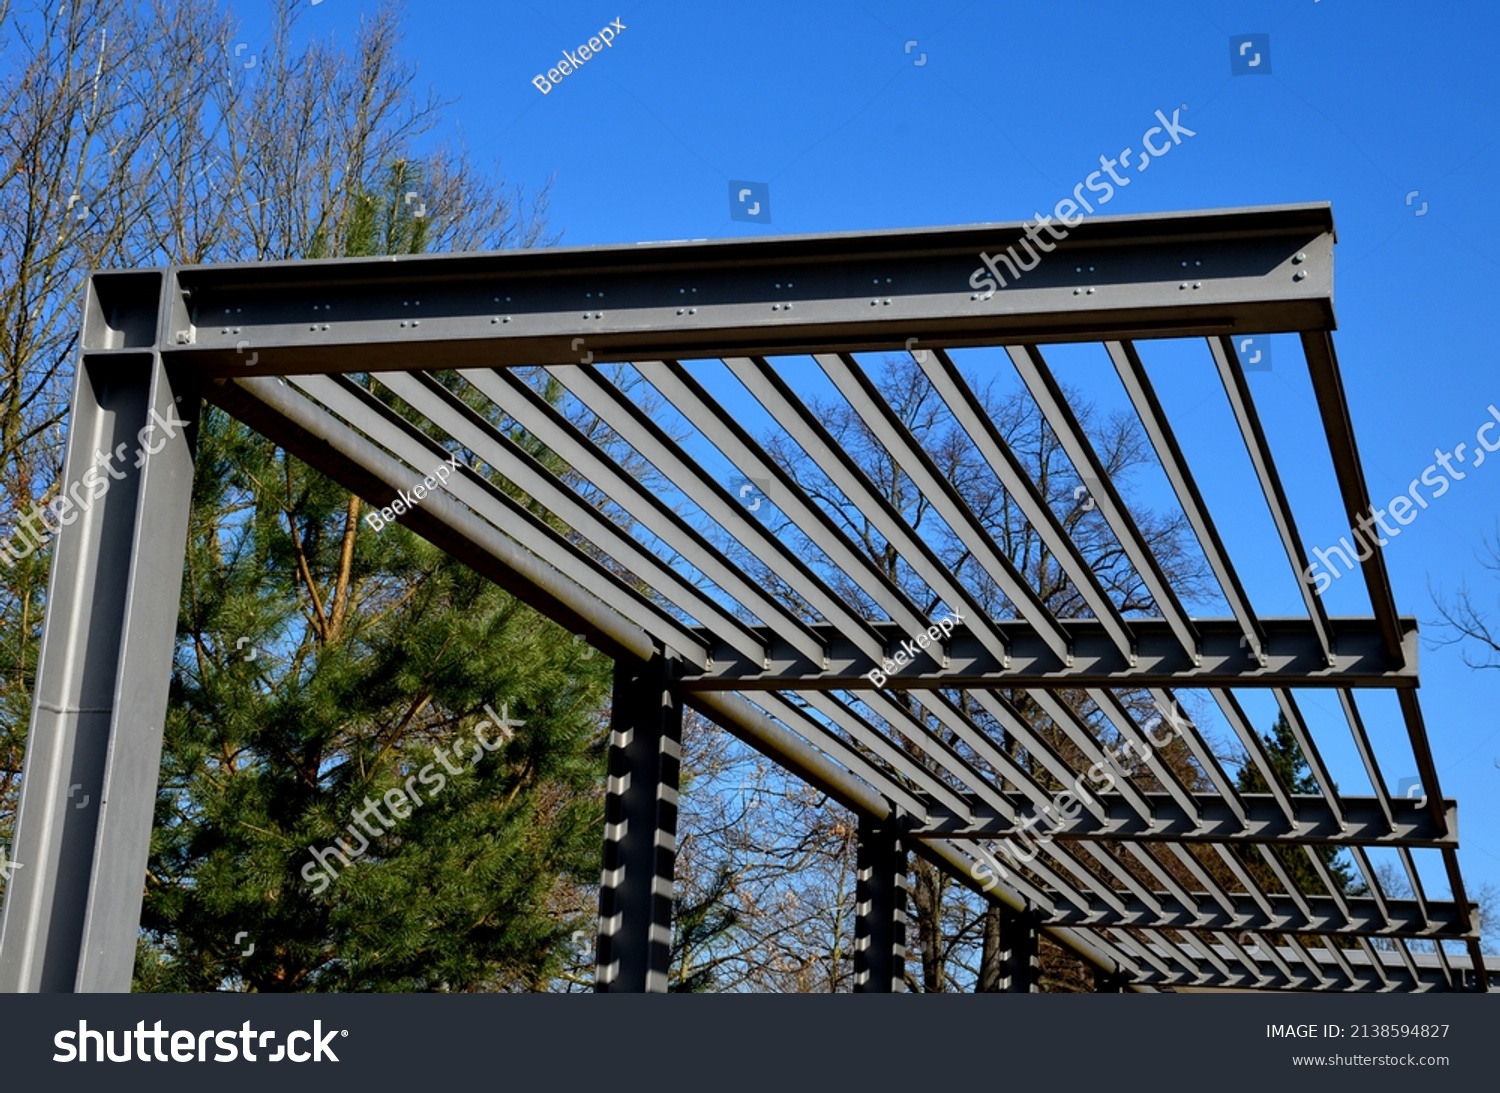 metal construction of the bus stop, gazebo pergola shelter. The roof is designed for climbing plants. L-painted beams and L-shaped ribs shading blinds with stripes on promenade in the park, sky,  blue #2138594827